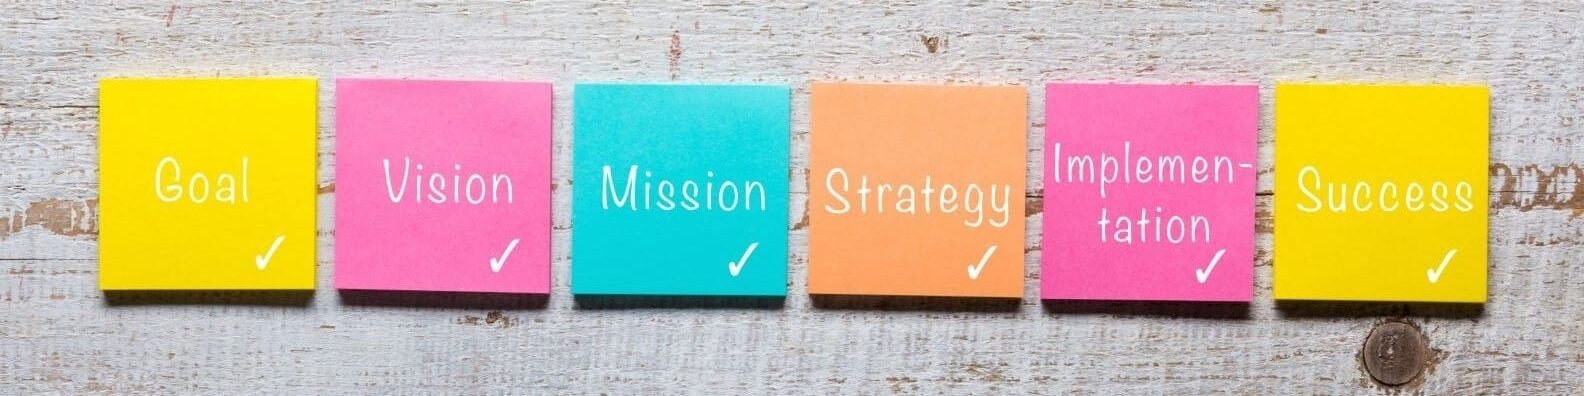 marketing process, Goal, Vision, Mission, Strategy, Implementation, Success